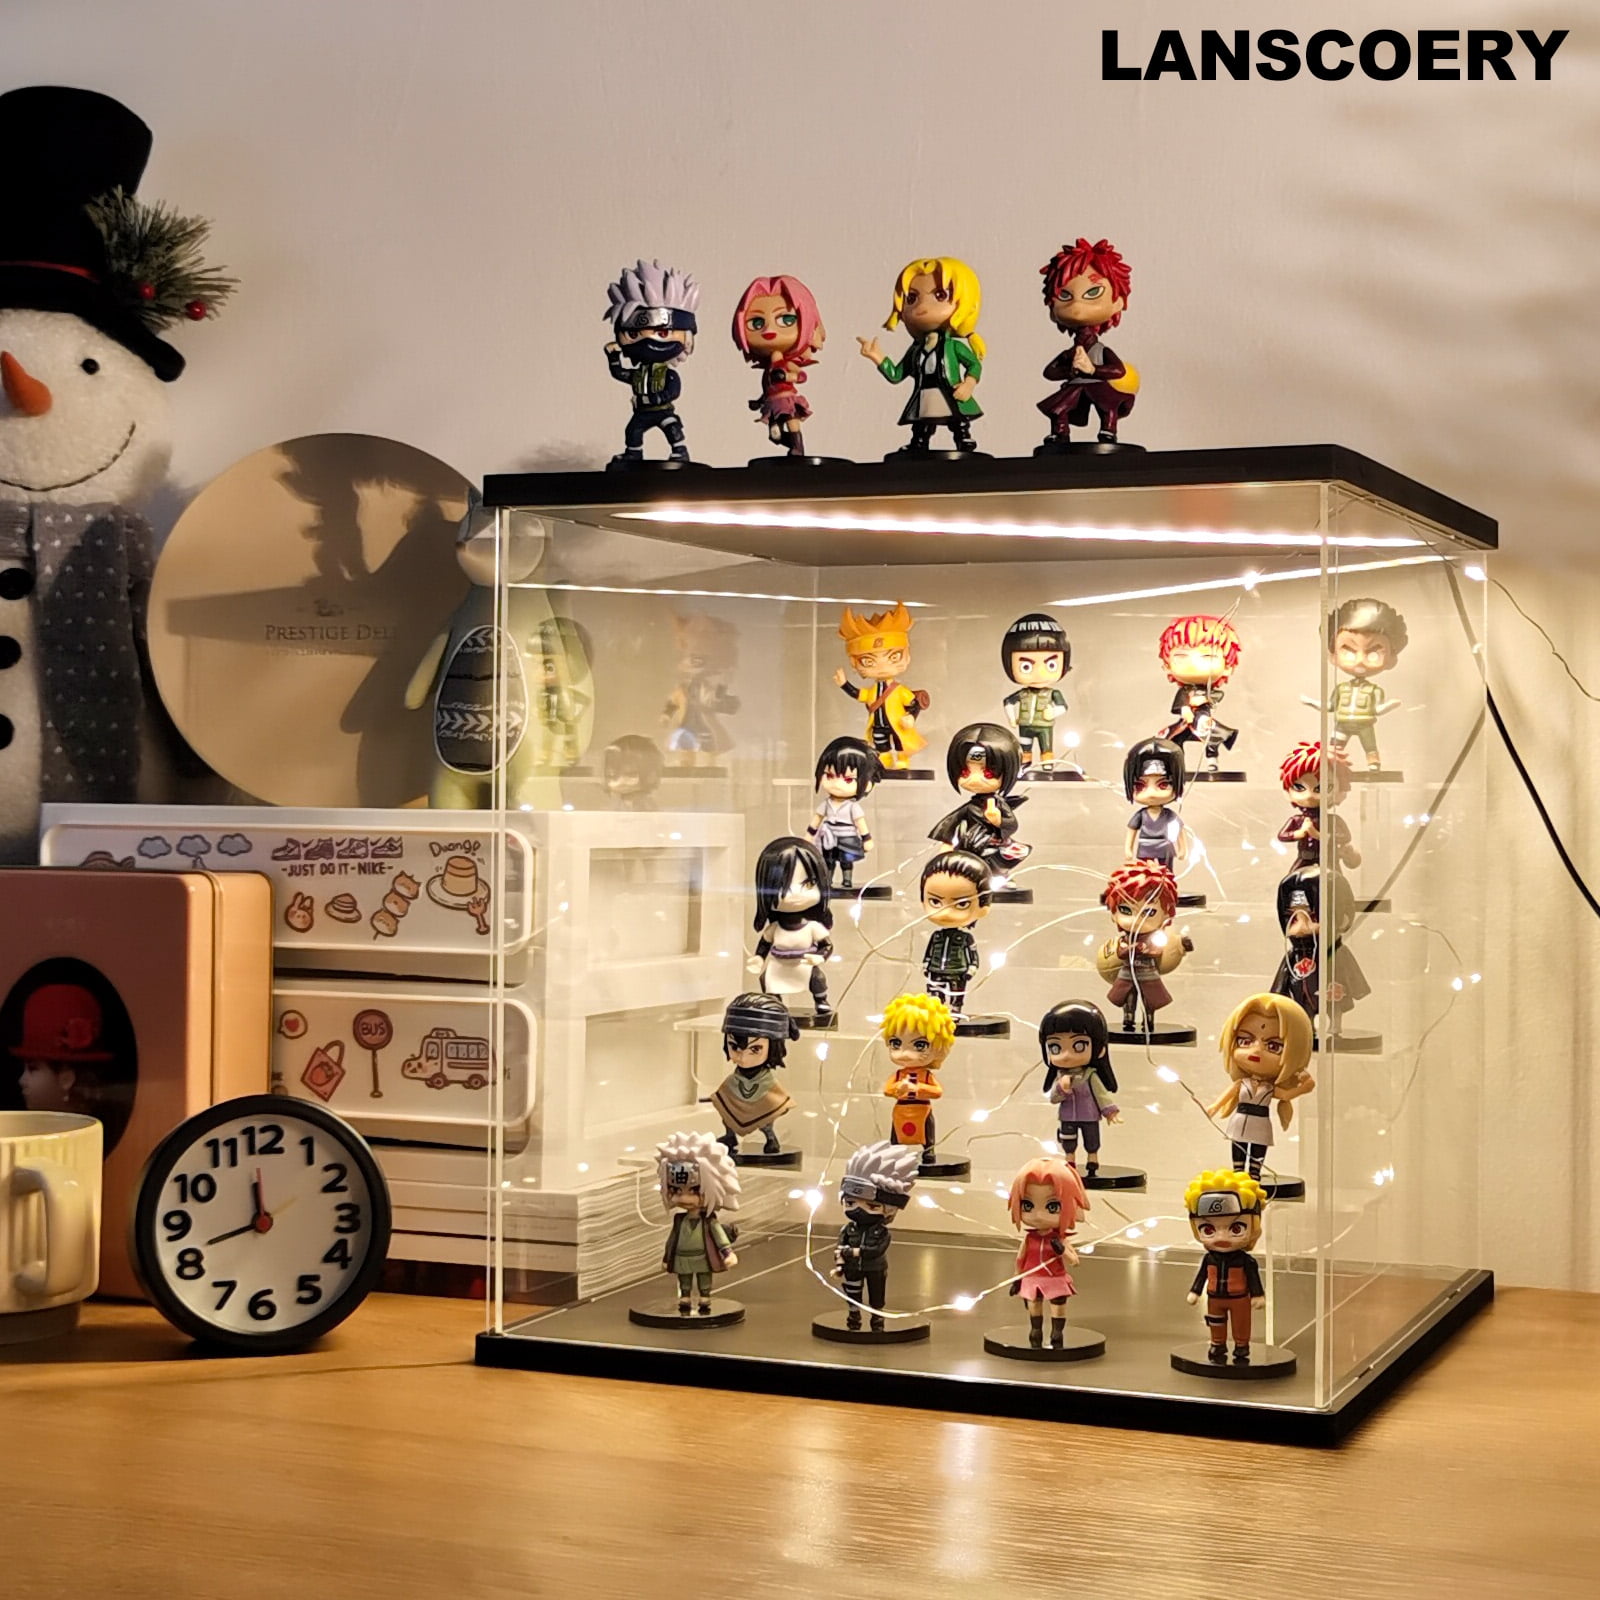 Buy SelfAssembly Acrylic Display CaseDeluxe Dustproof ShowcaseCube  Countertop Box for Pop Figures Collectibles ToysNeed Remove The Protective  Film 8x8x12 inch 20x20x30cm Online at Low Prices in India  Amazonin